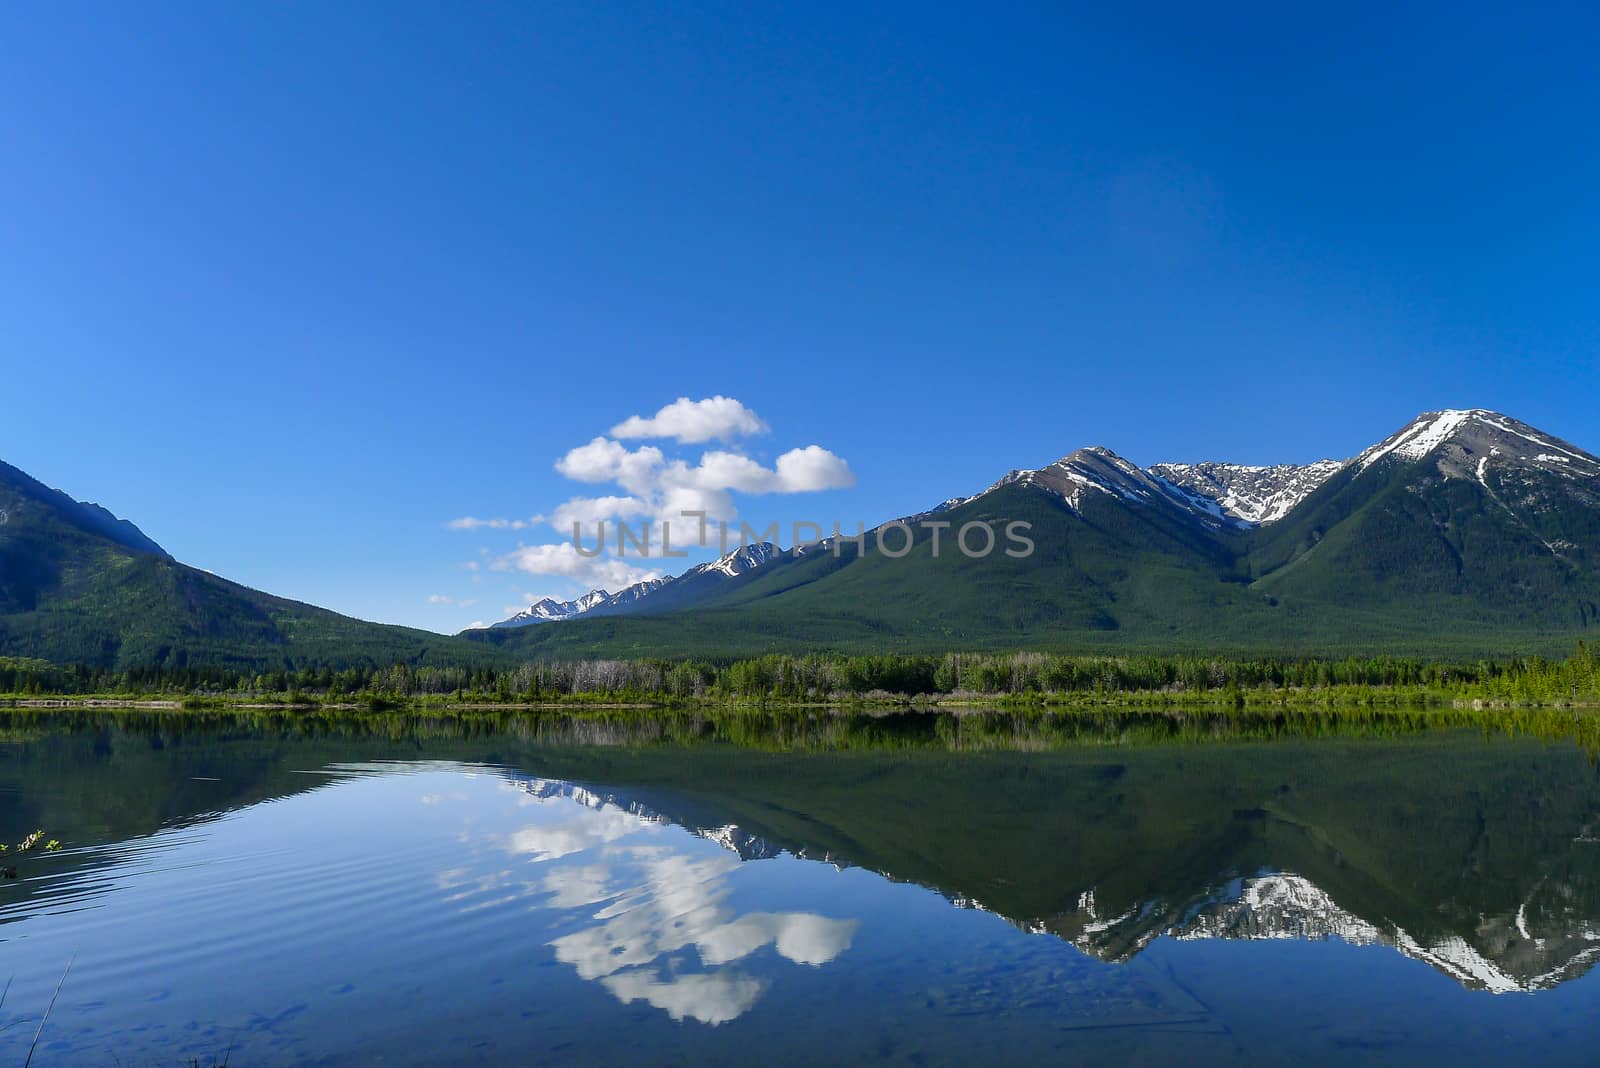 Vermilion Lake with reflection by chrisukphoto